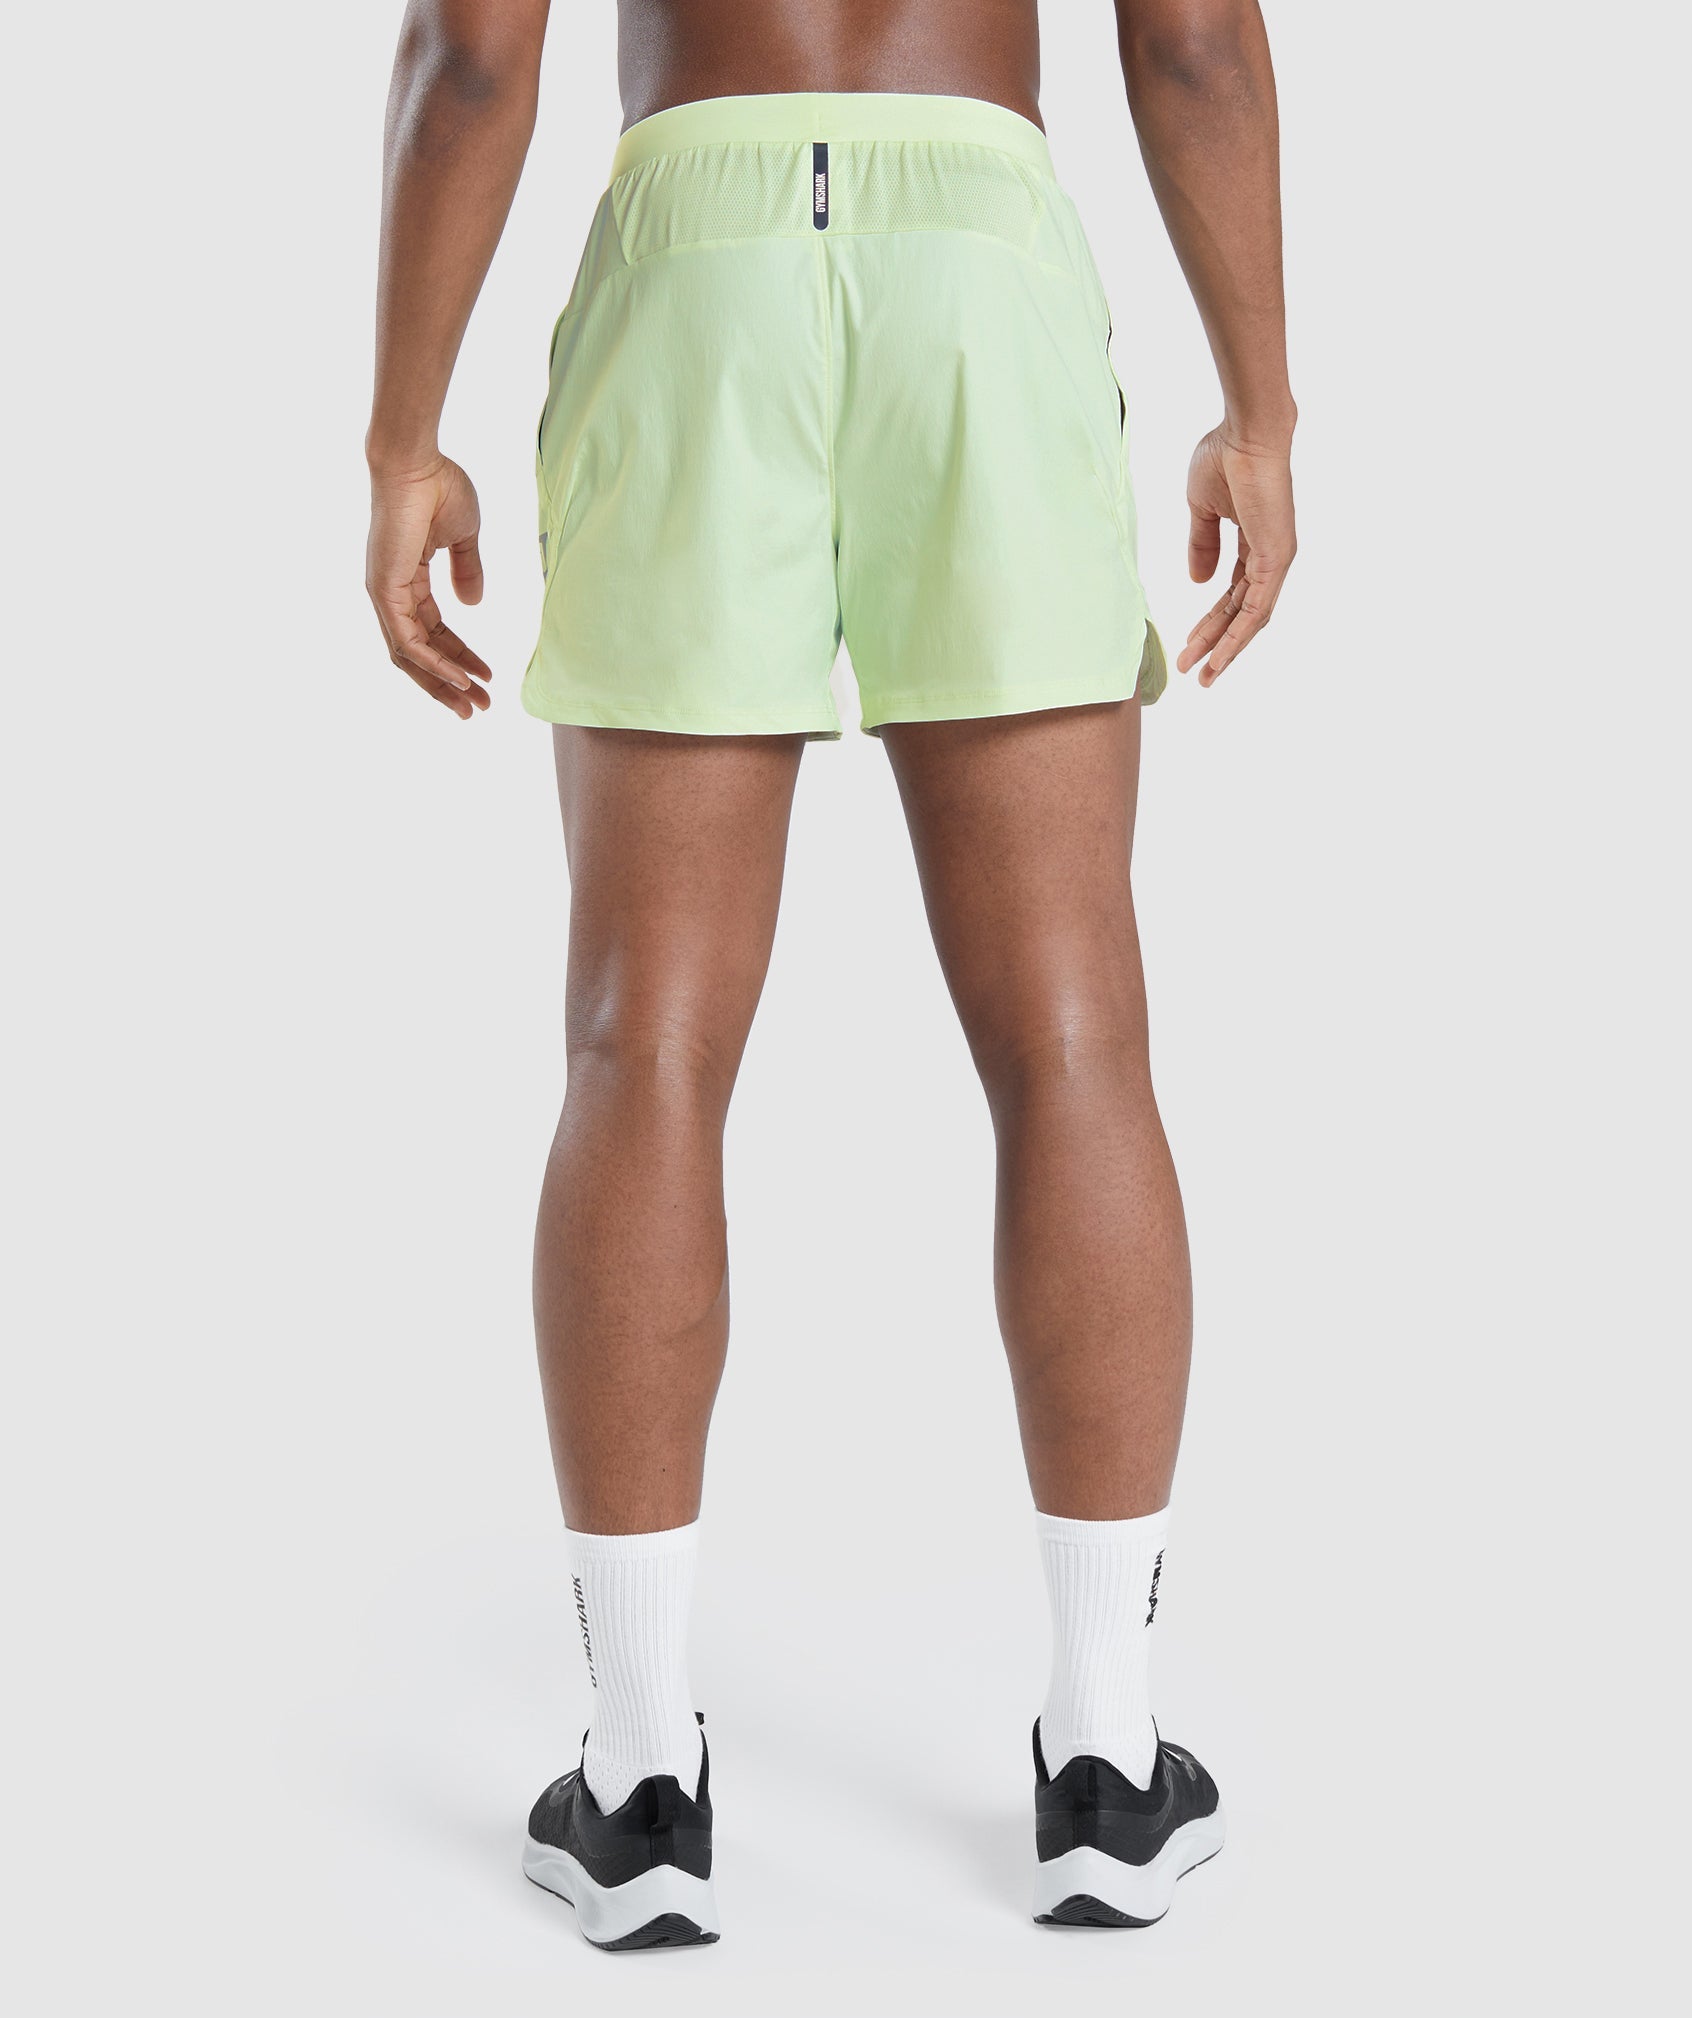 Speed Evolve 5" Shorts in Cucumber Green - view 2